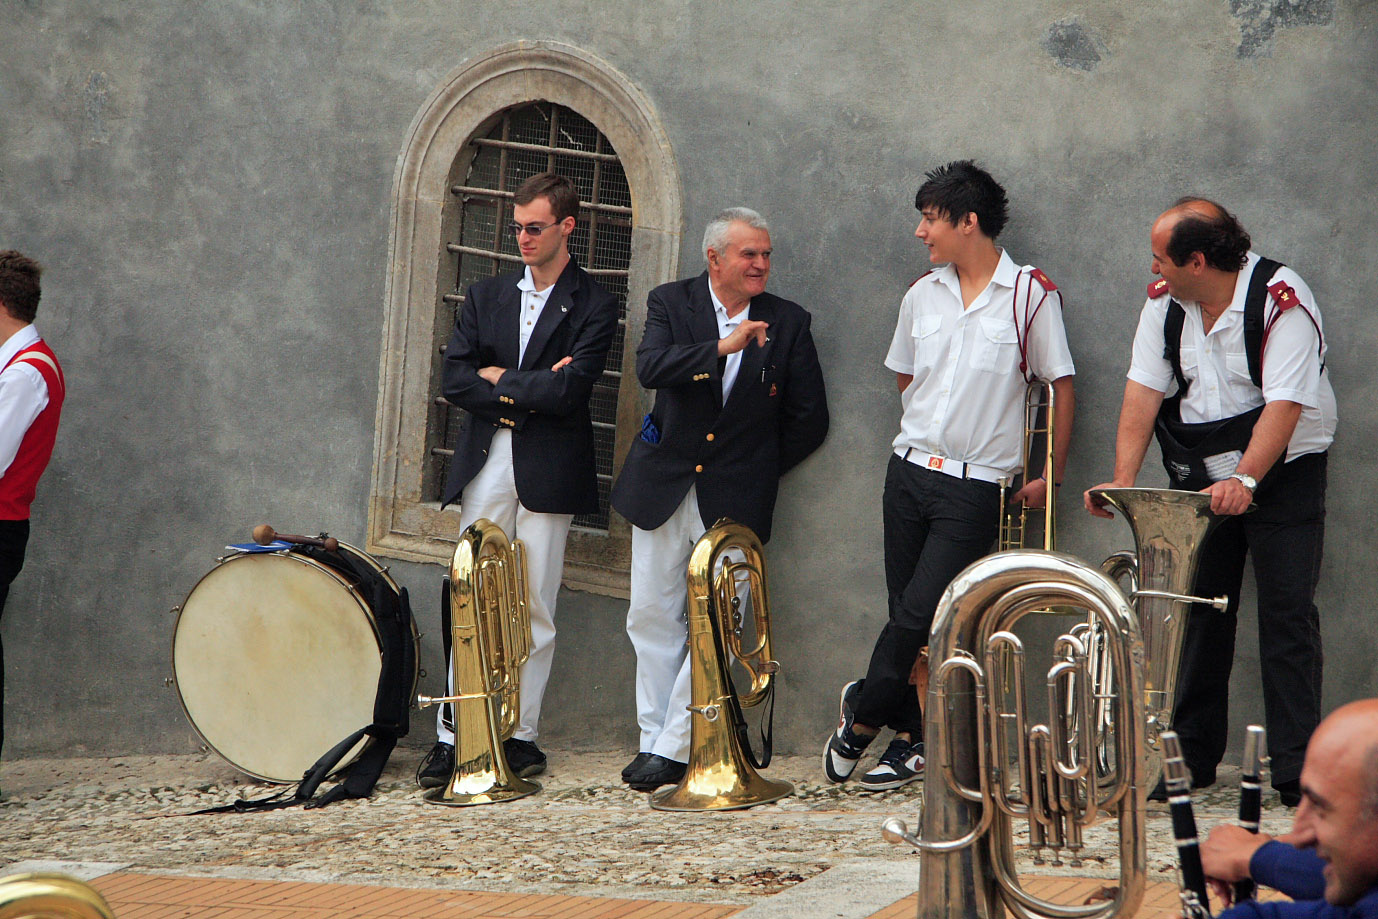 One of the many bands getting ready to perform in Spoletto.